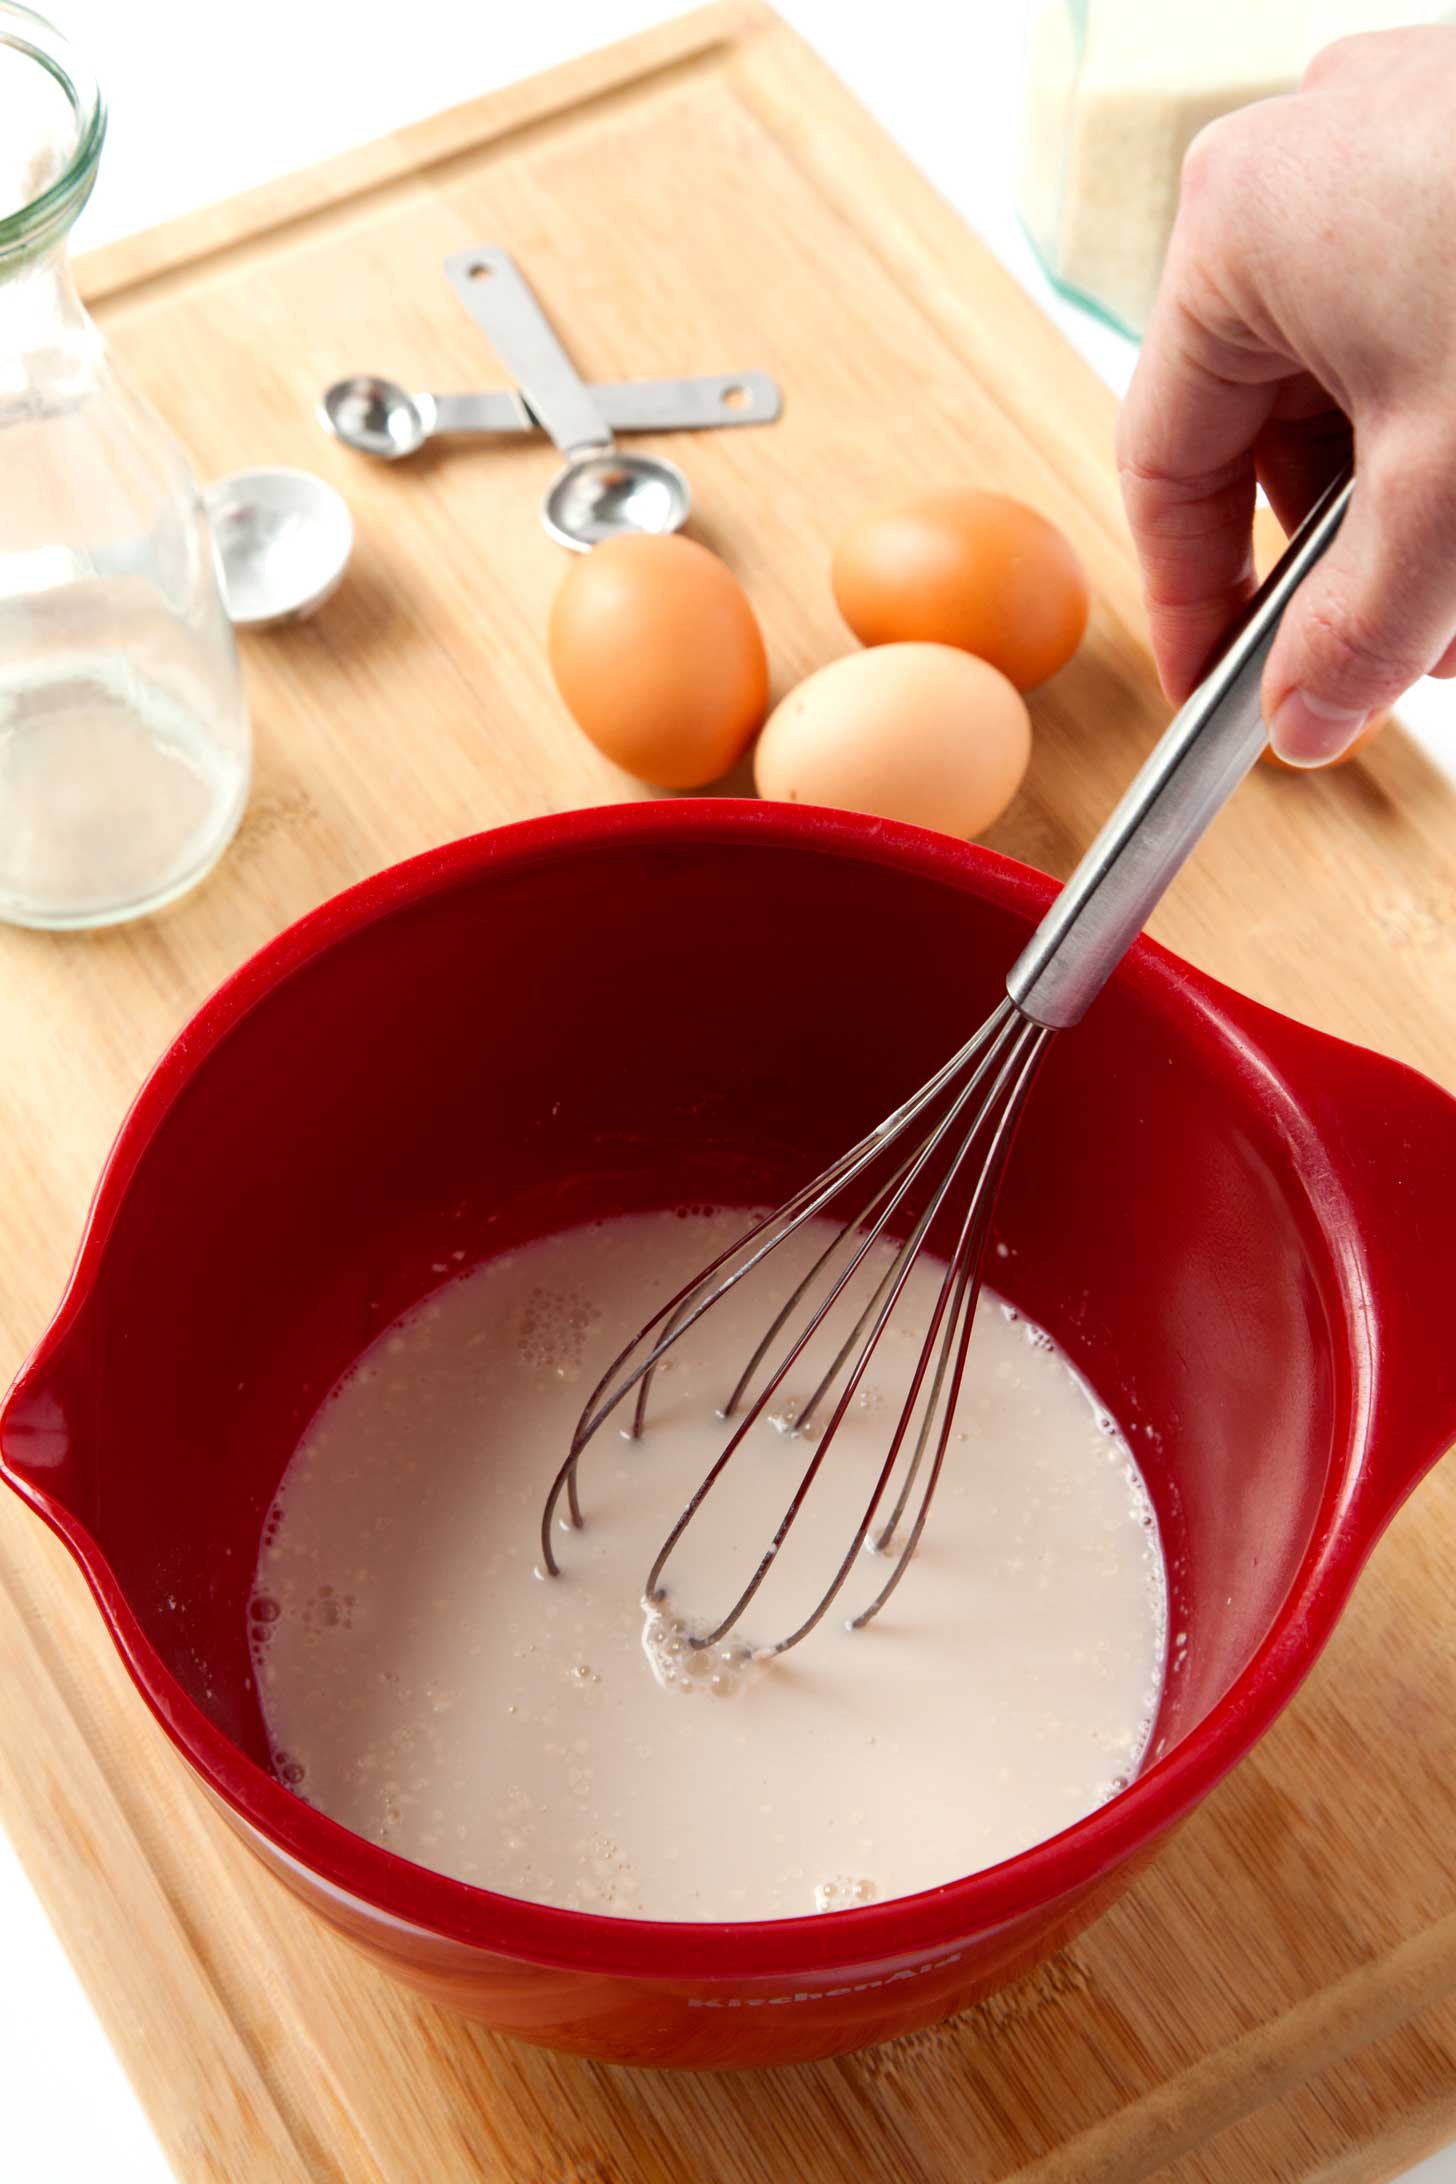 Whisking together french toast batter with eggs and measuring spoons in the background.